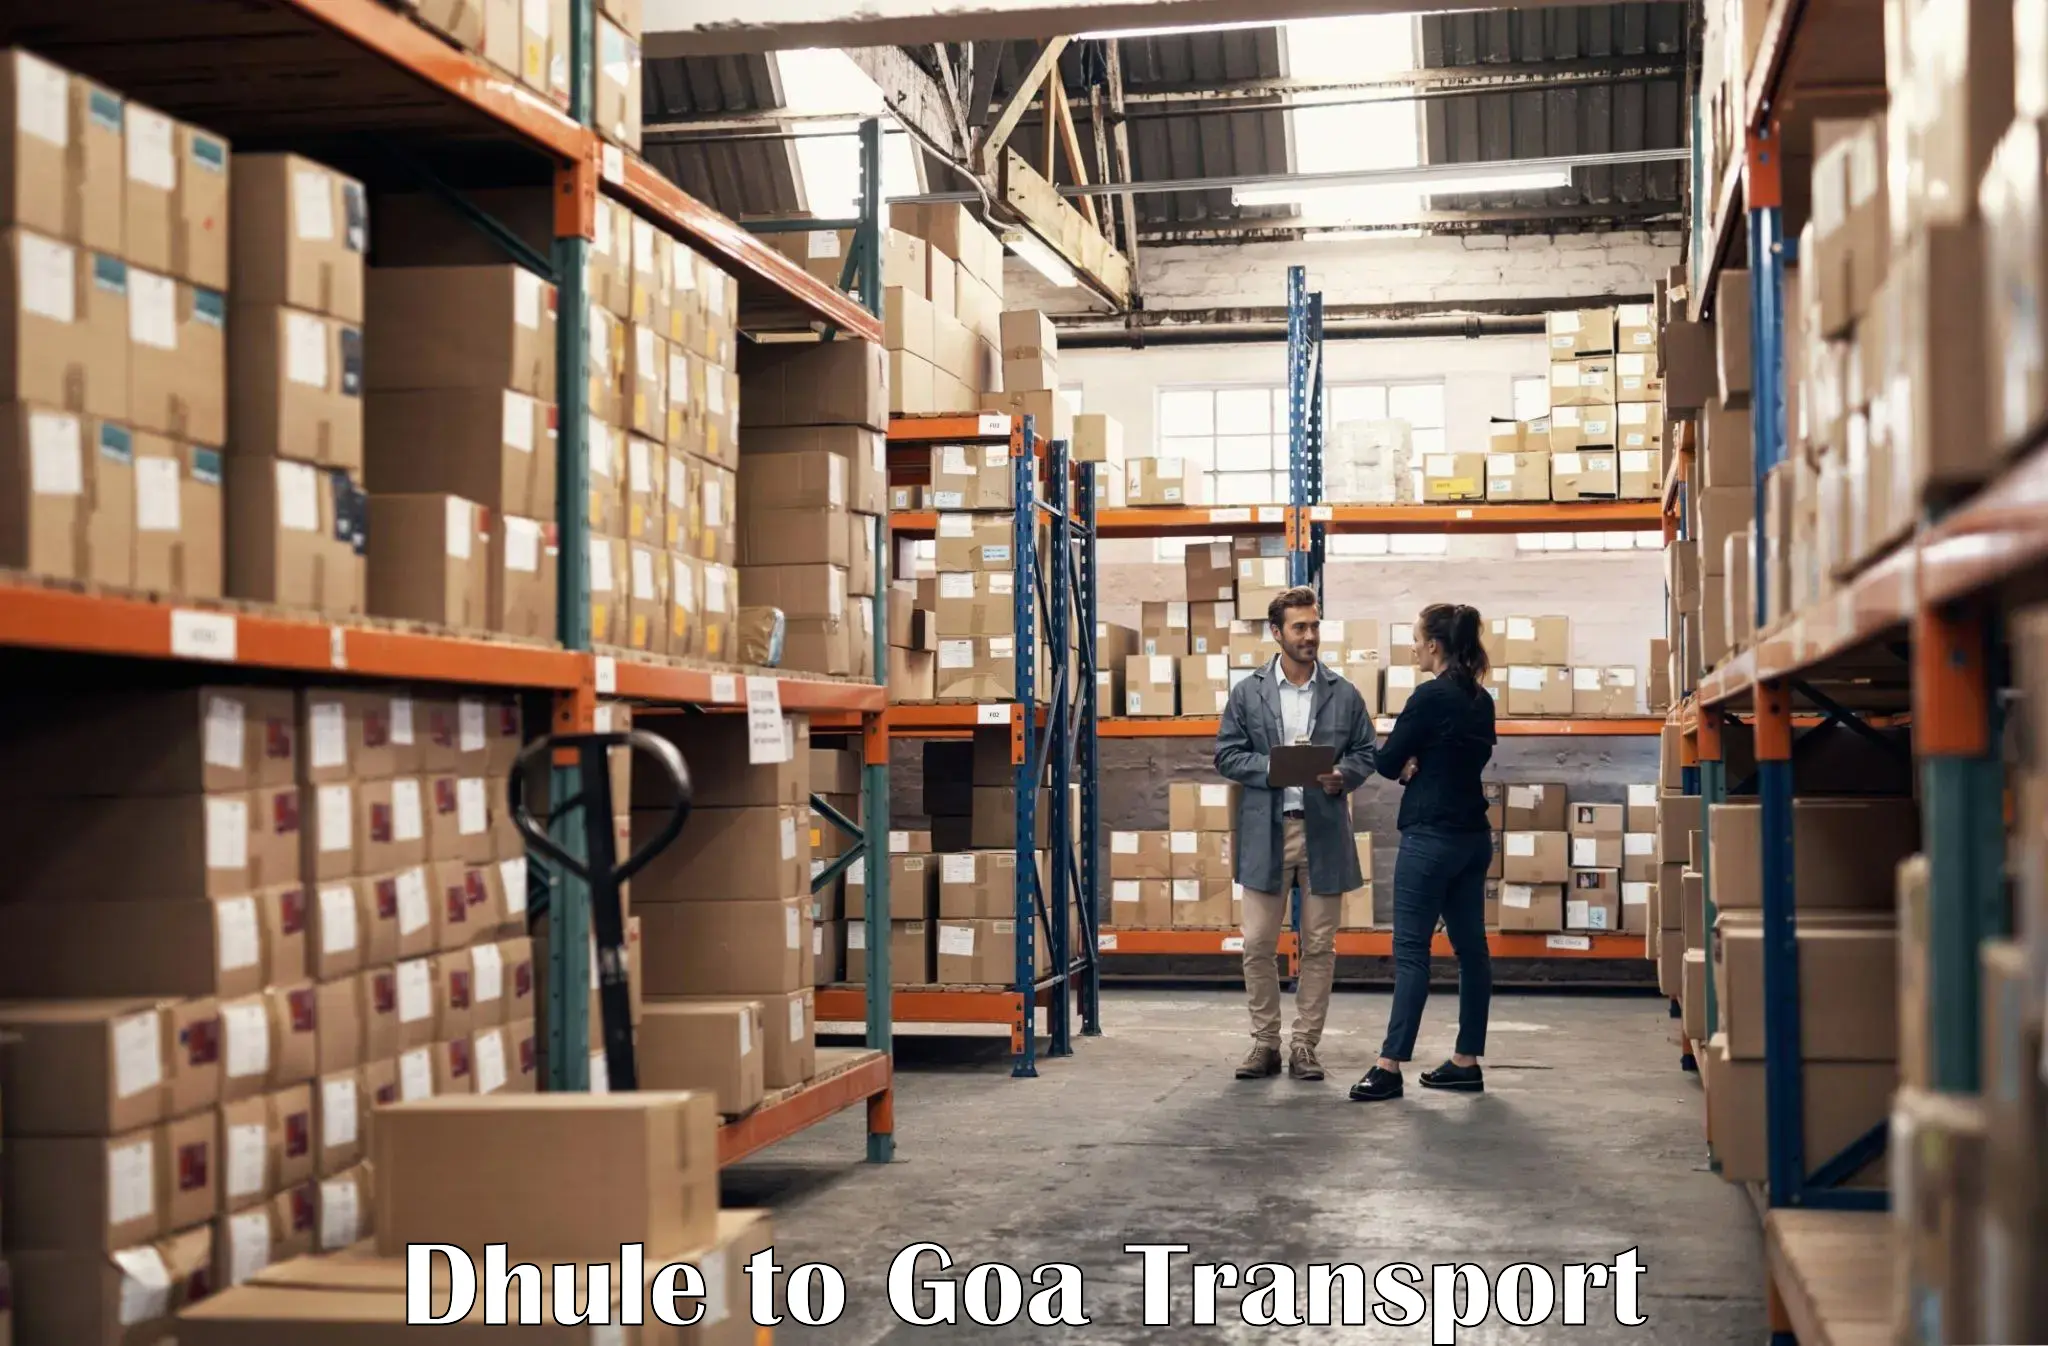 Container transport service Dhule to Goa